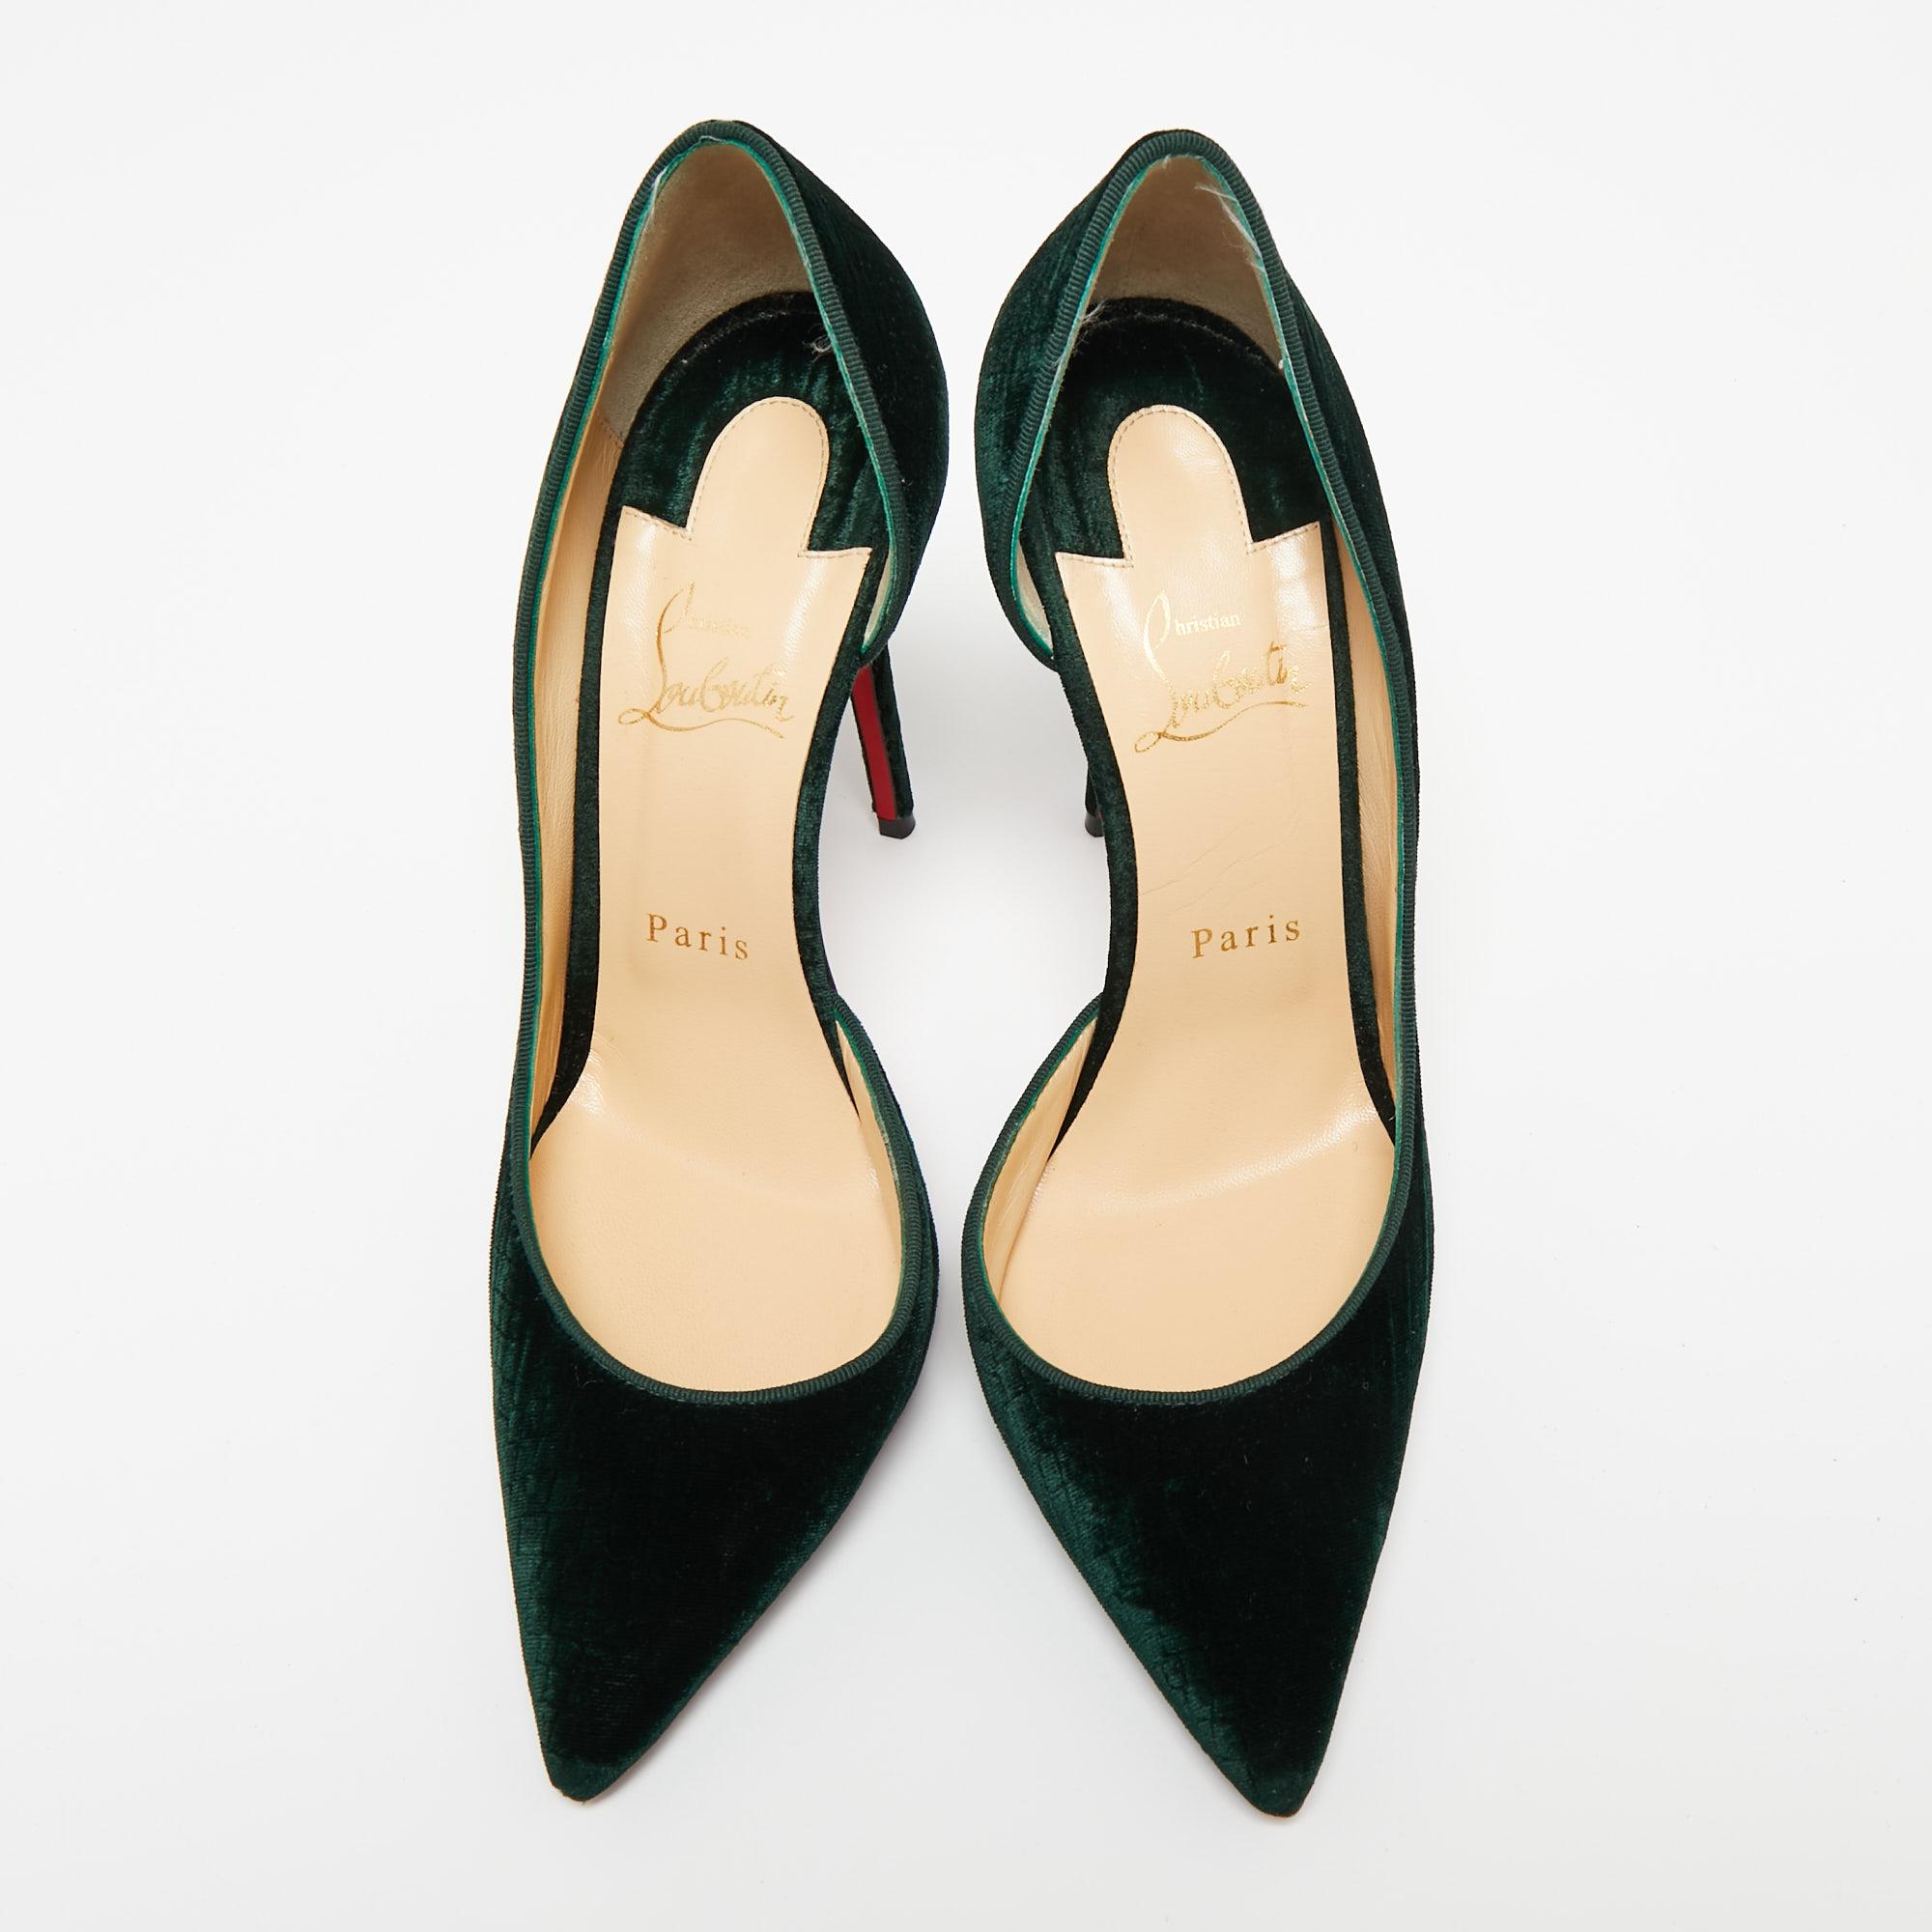 Skilfully crafted from velvet in a D'orsay style with pointed toes, these Christian Louboutin pumps come ready to give you a high-fashion experience. The rich green pumps, with sharp-cut toplines, are balanced on 11 cm heels and finished with